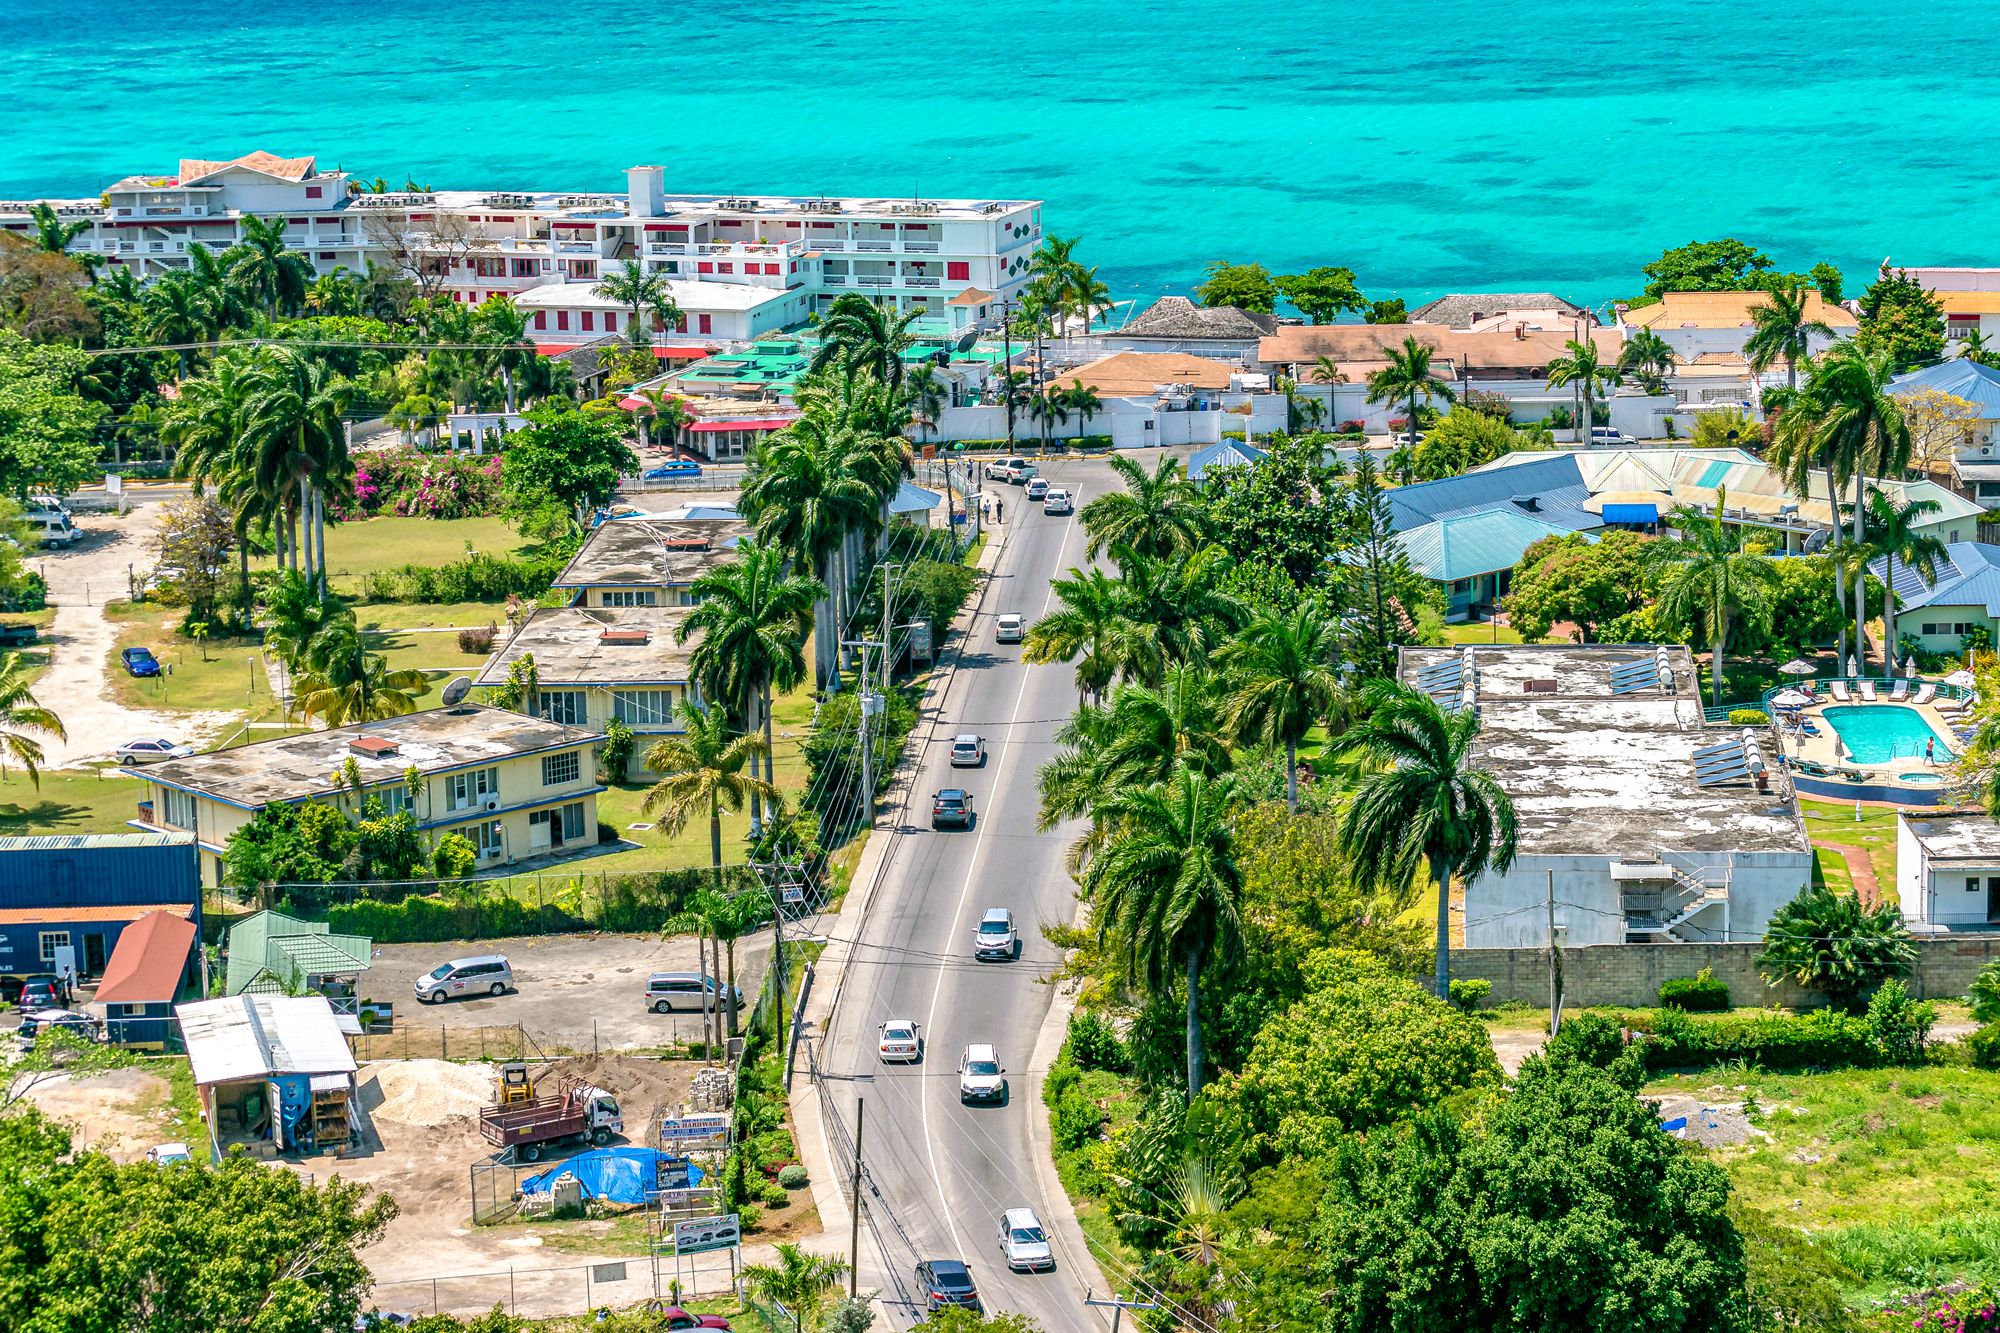 28 Helpful Travel Tips For Jamaica Dos And Don’ts Beaches